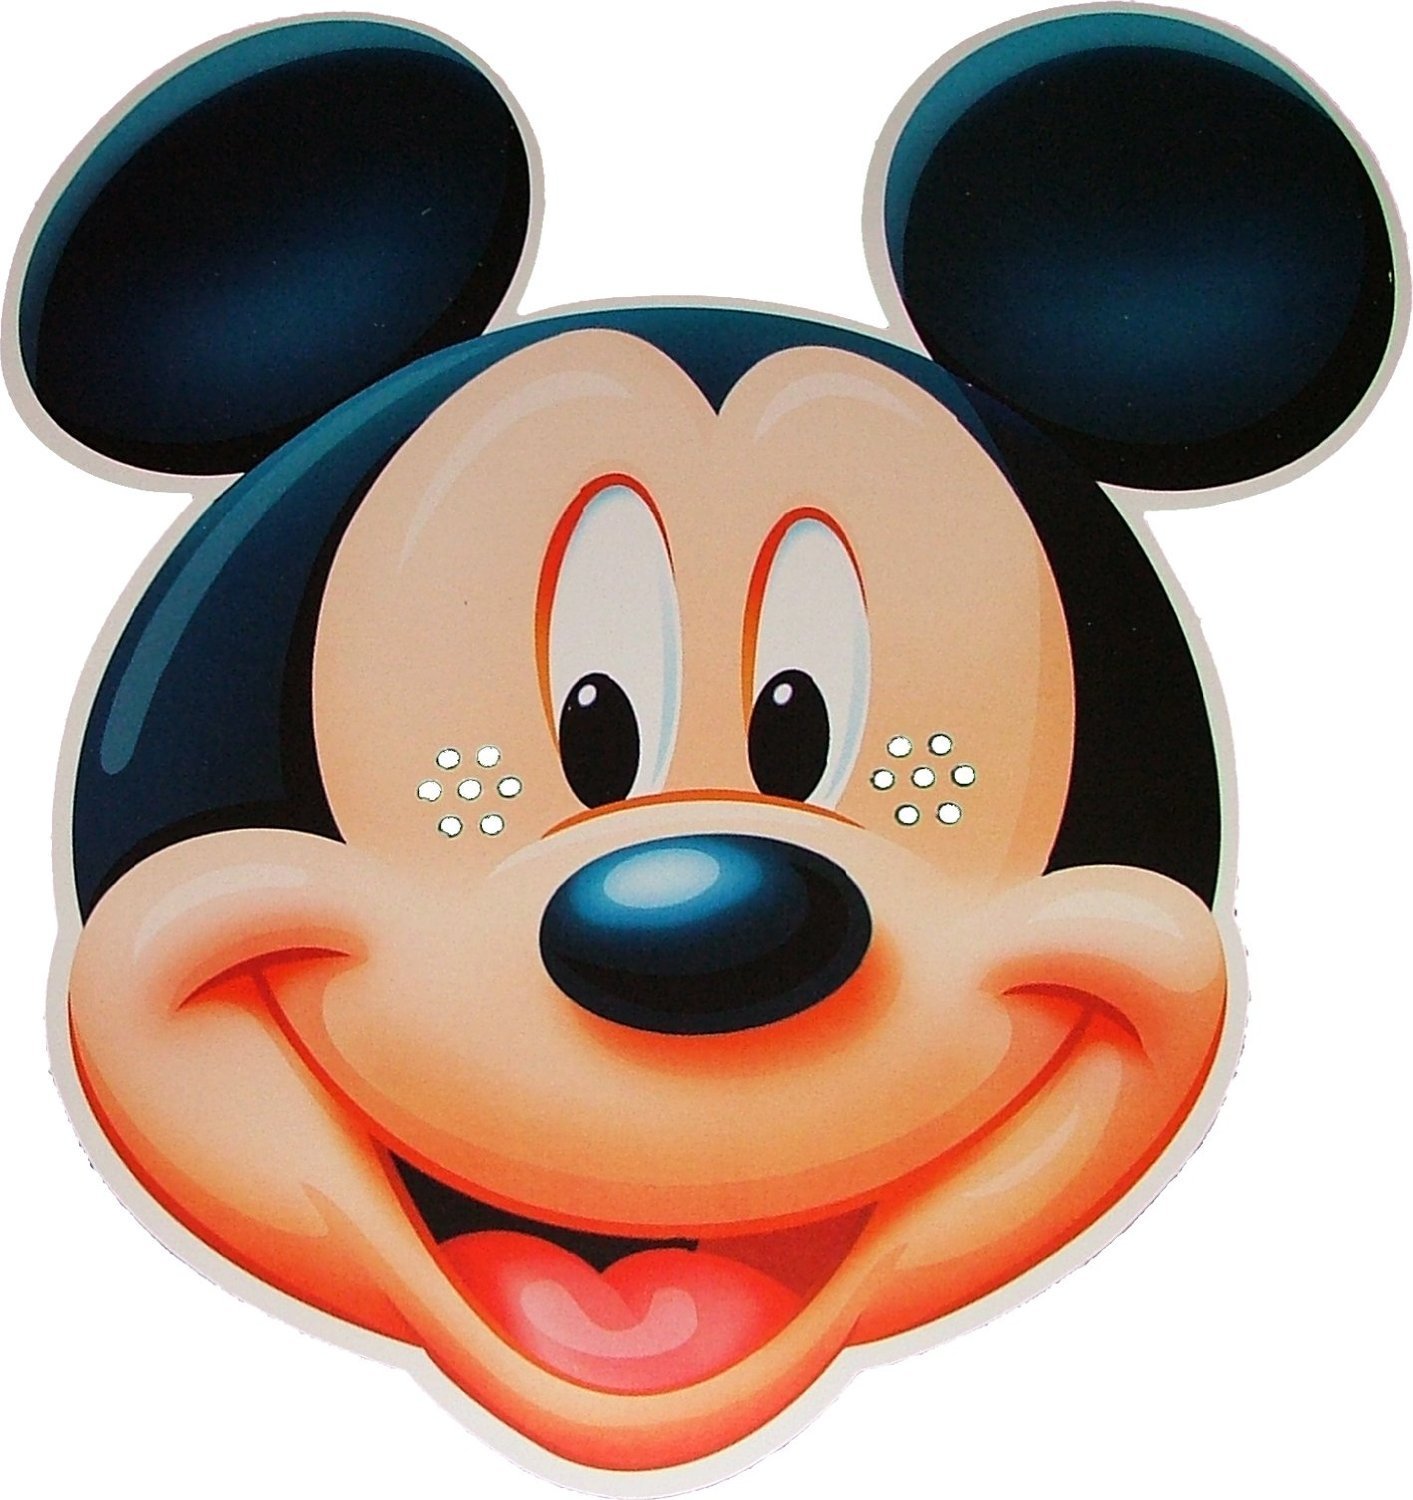 Pics Of Mickey Mouse Face.